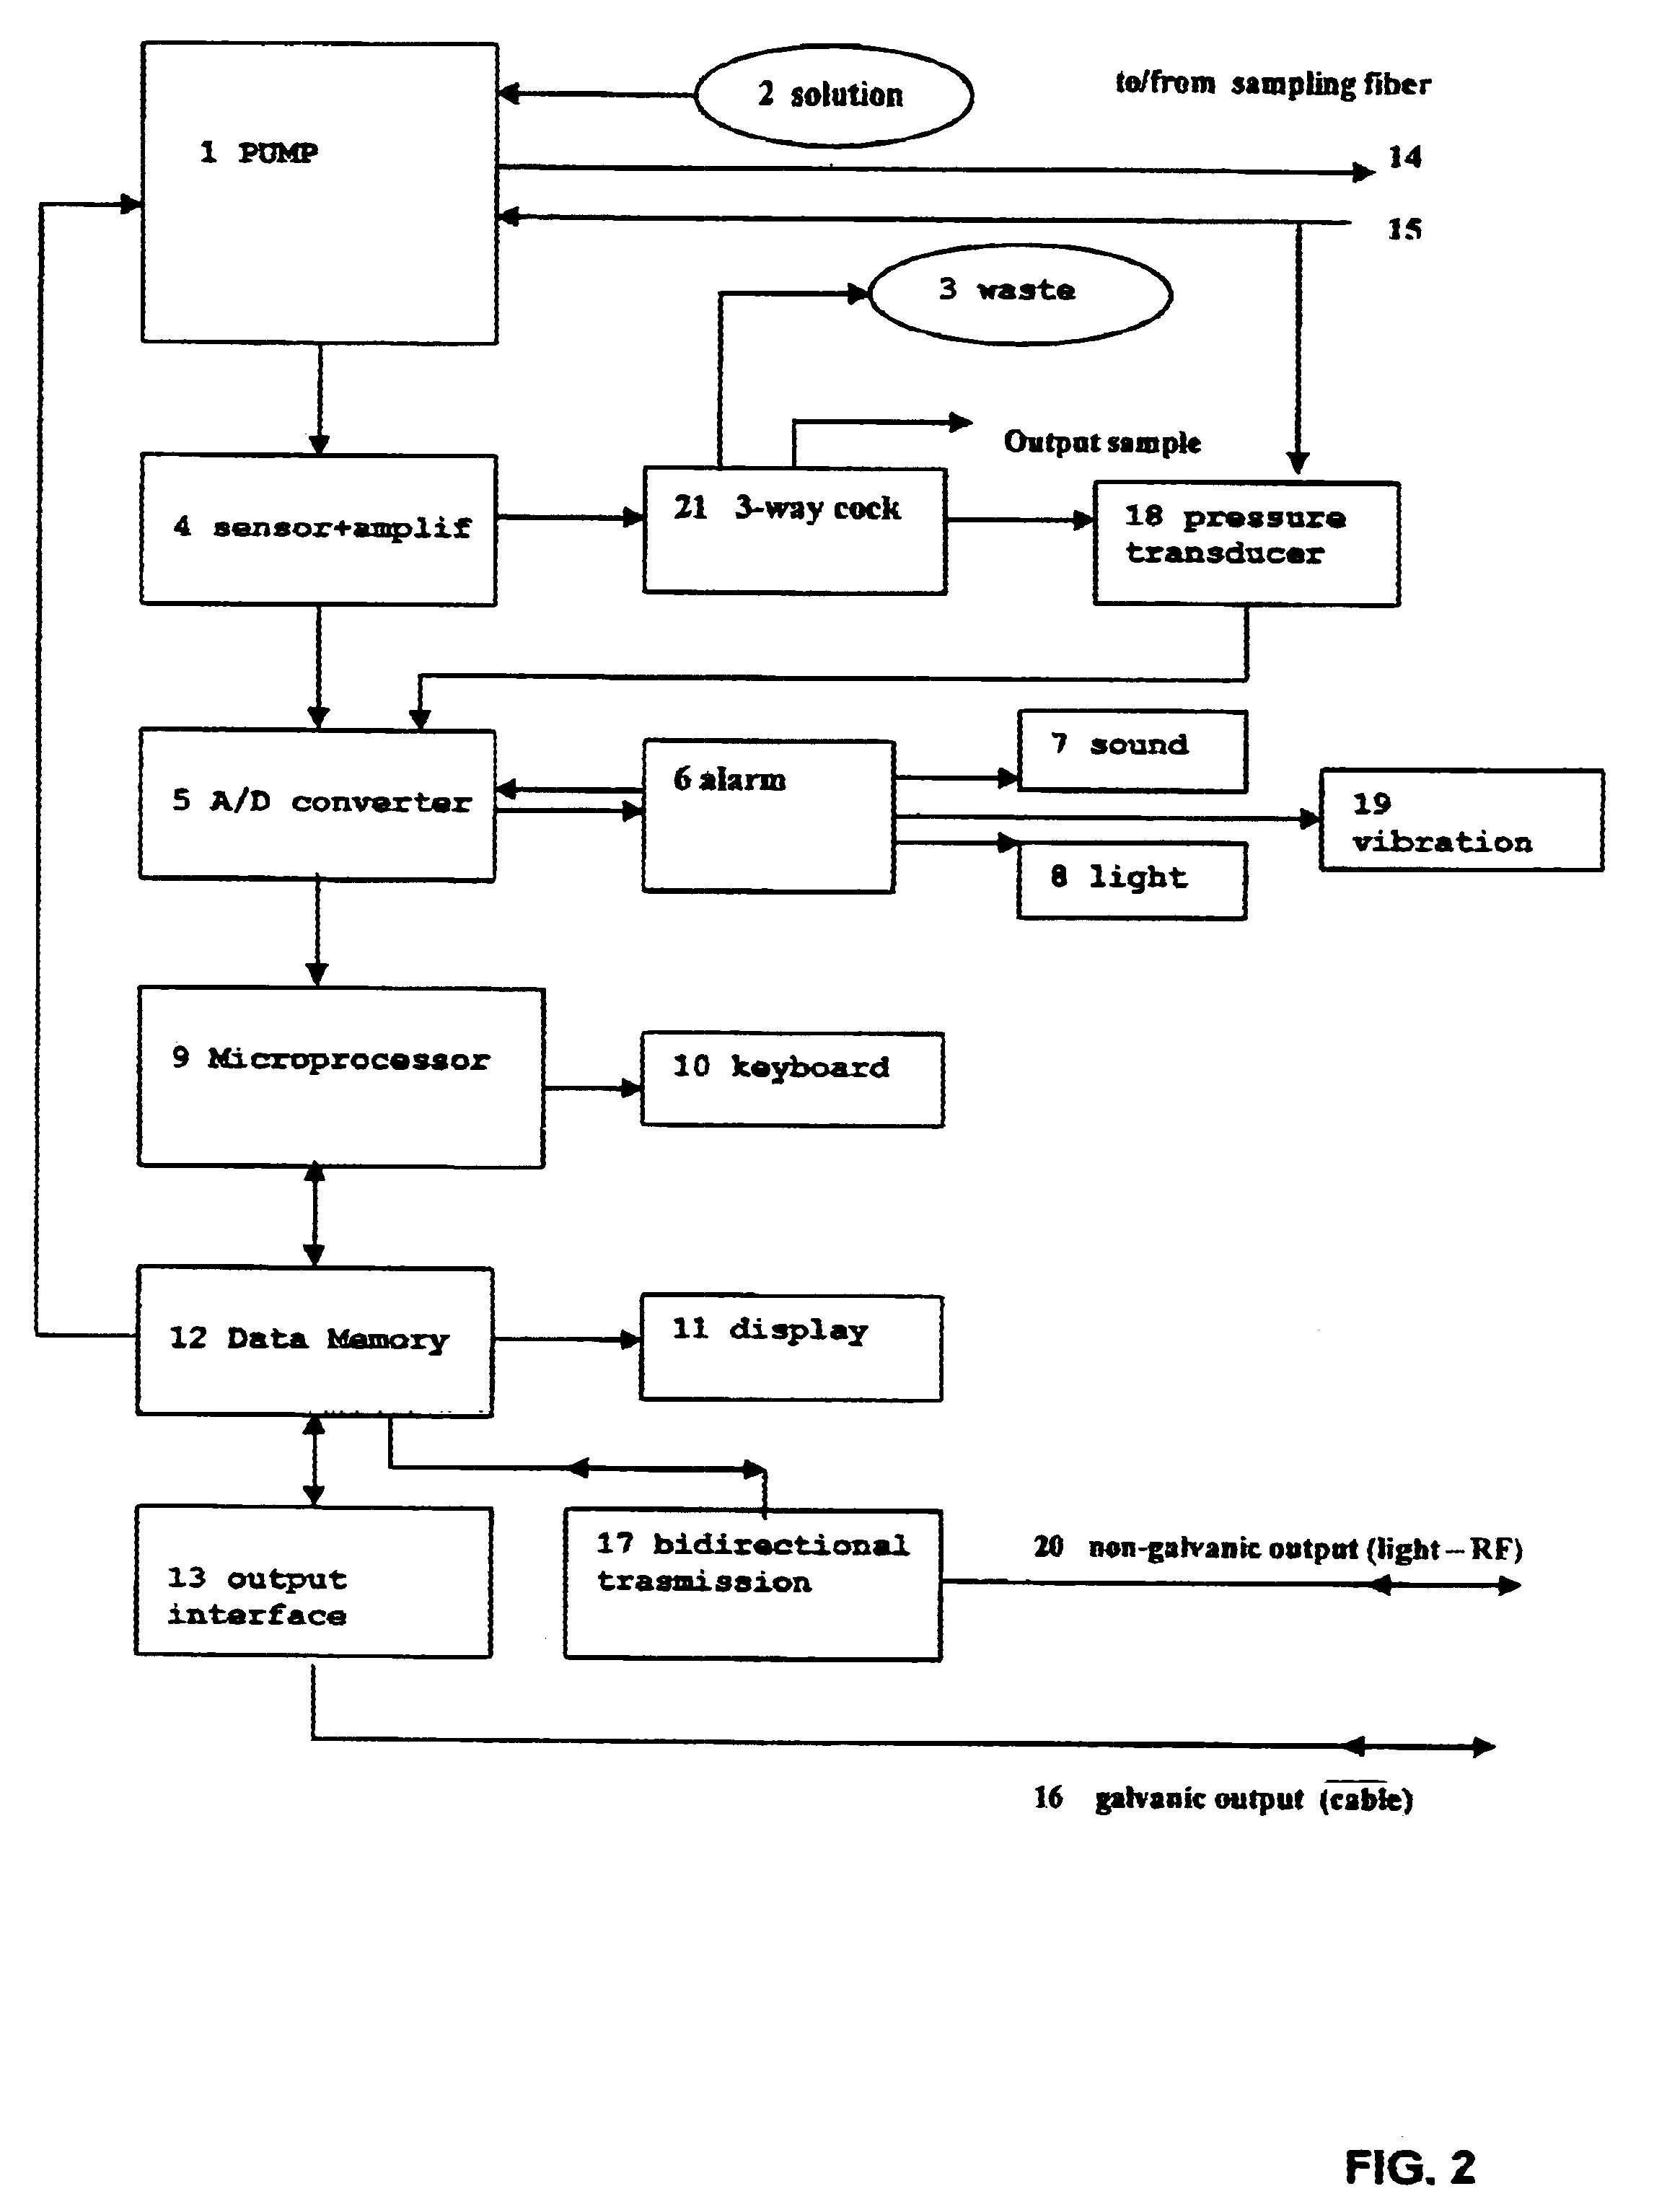 Apparatus for measurement and control of the content of glucose, lactate or other metabolites in biological fluids